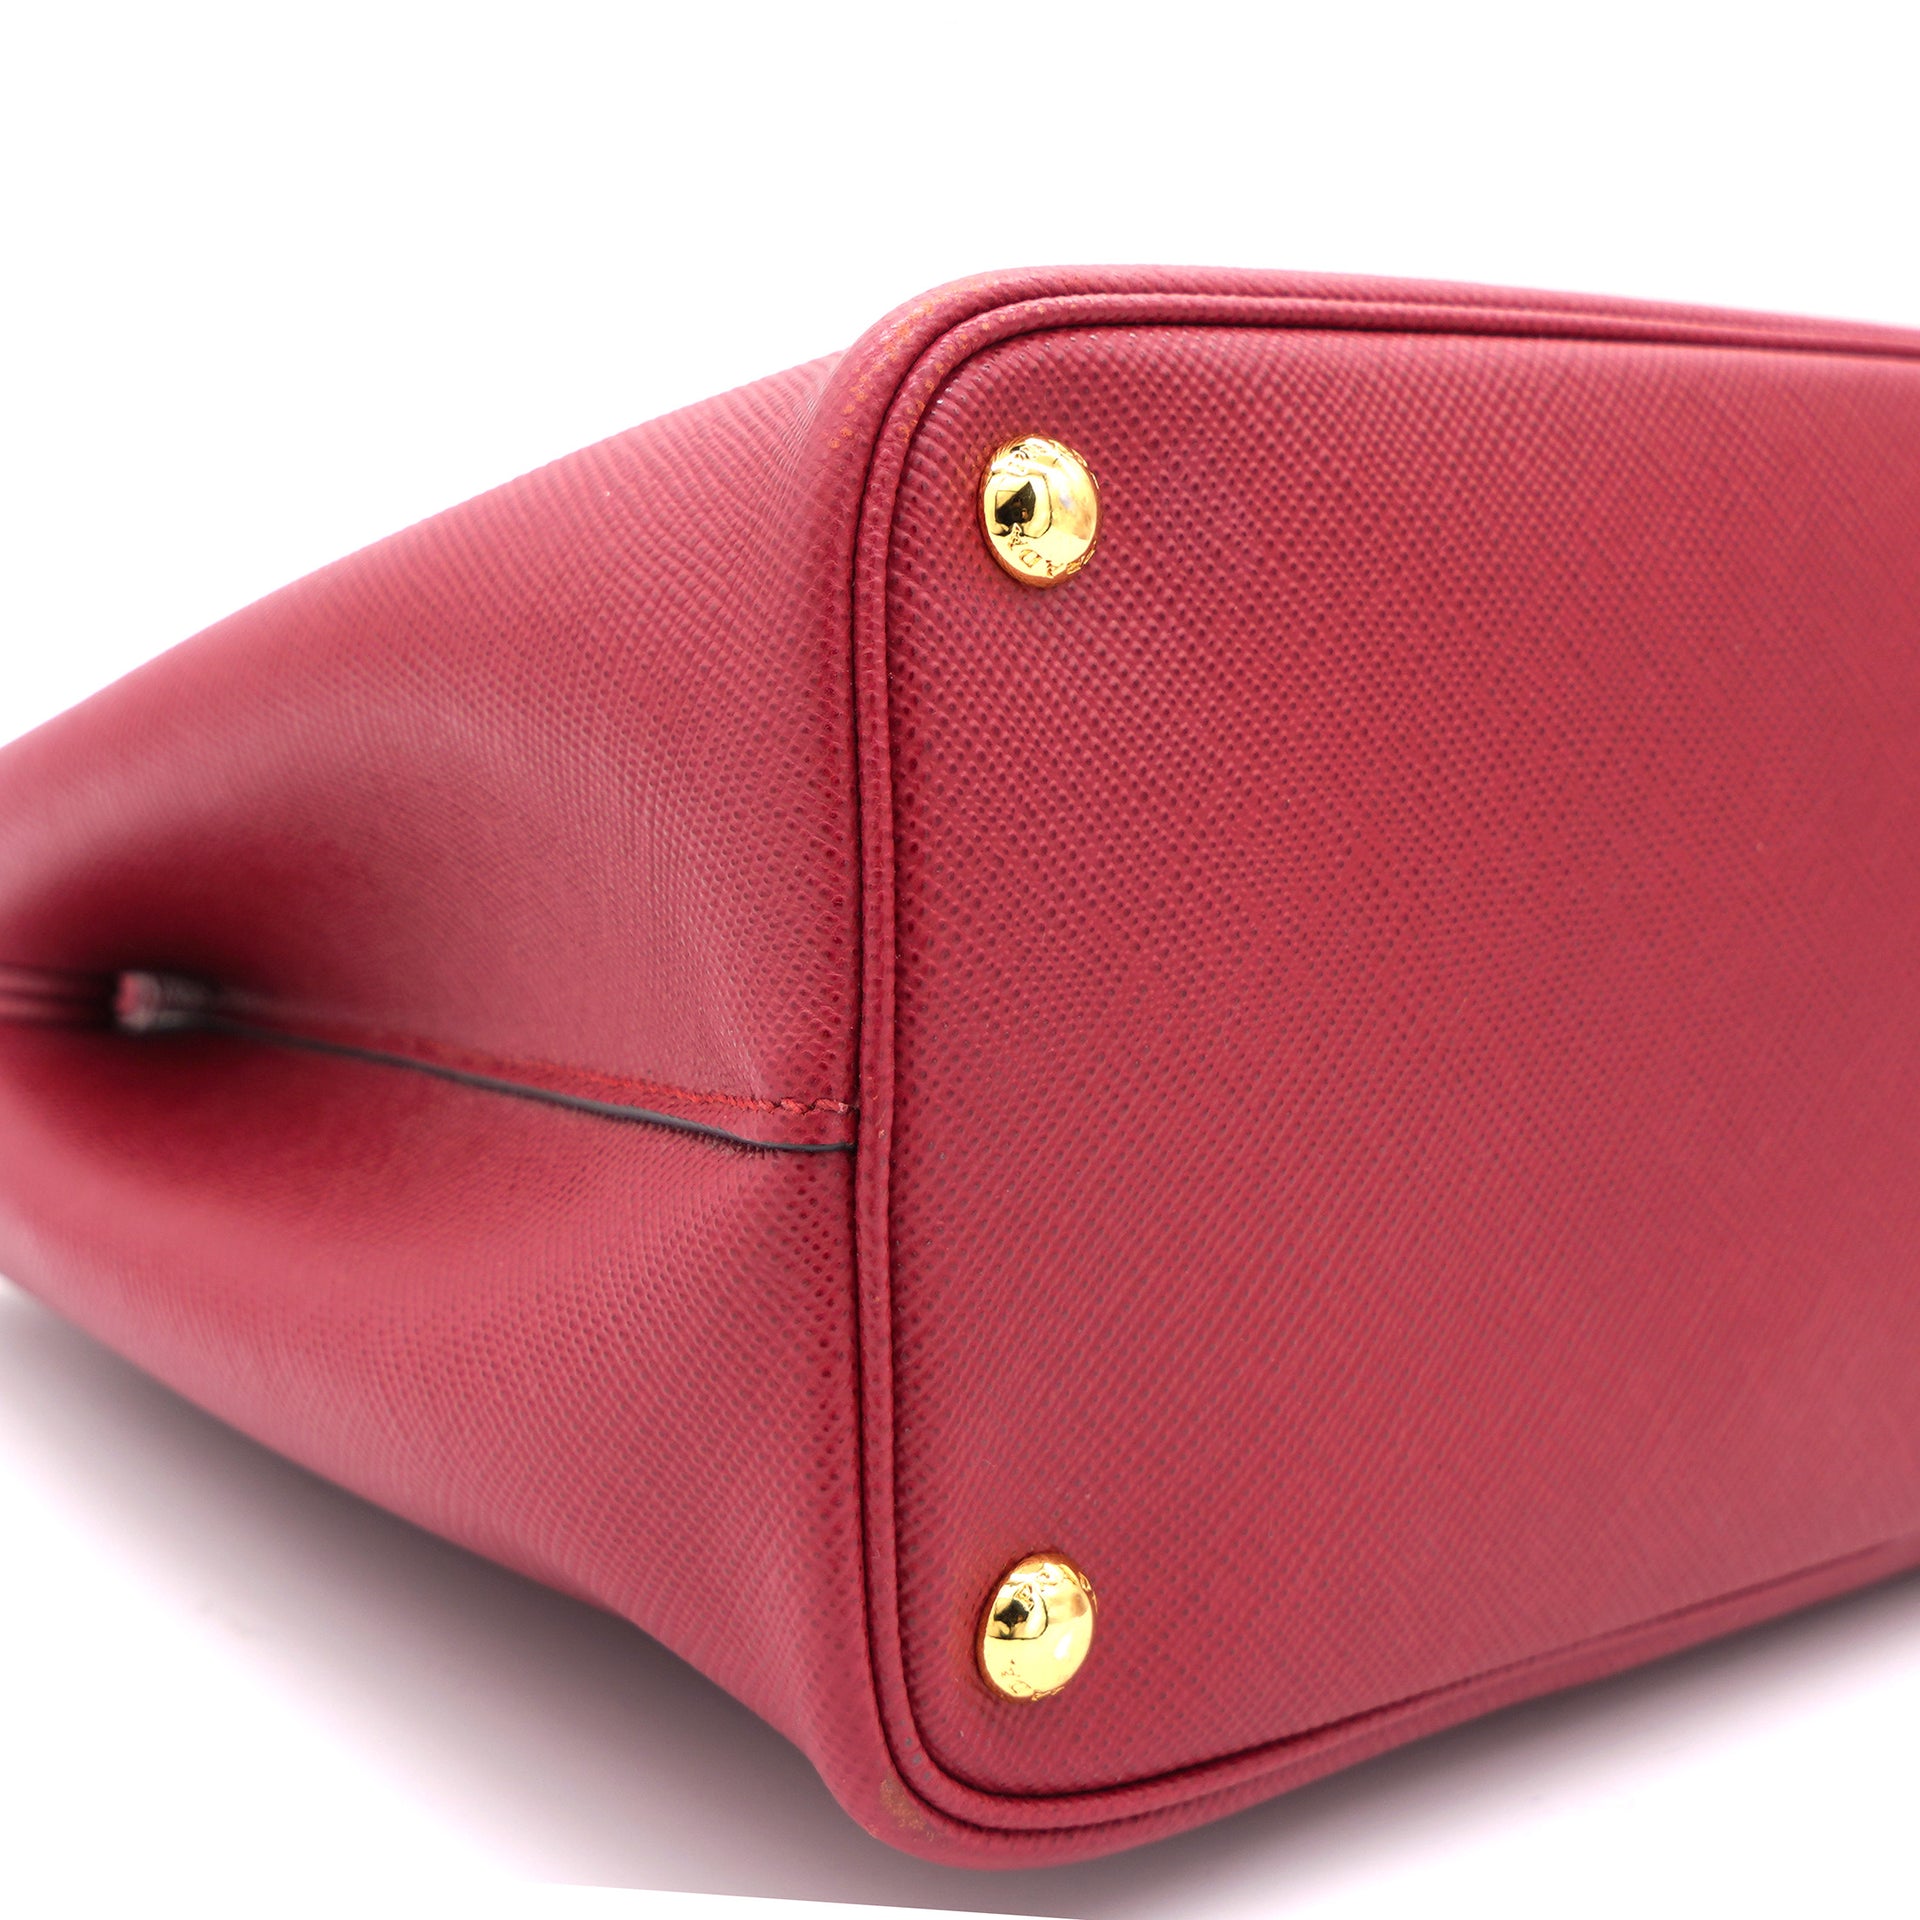 Medium Red Saffiano Leather Double Top Handle Bag